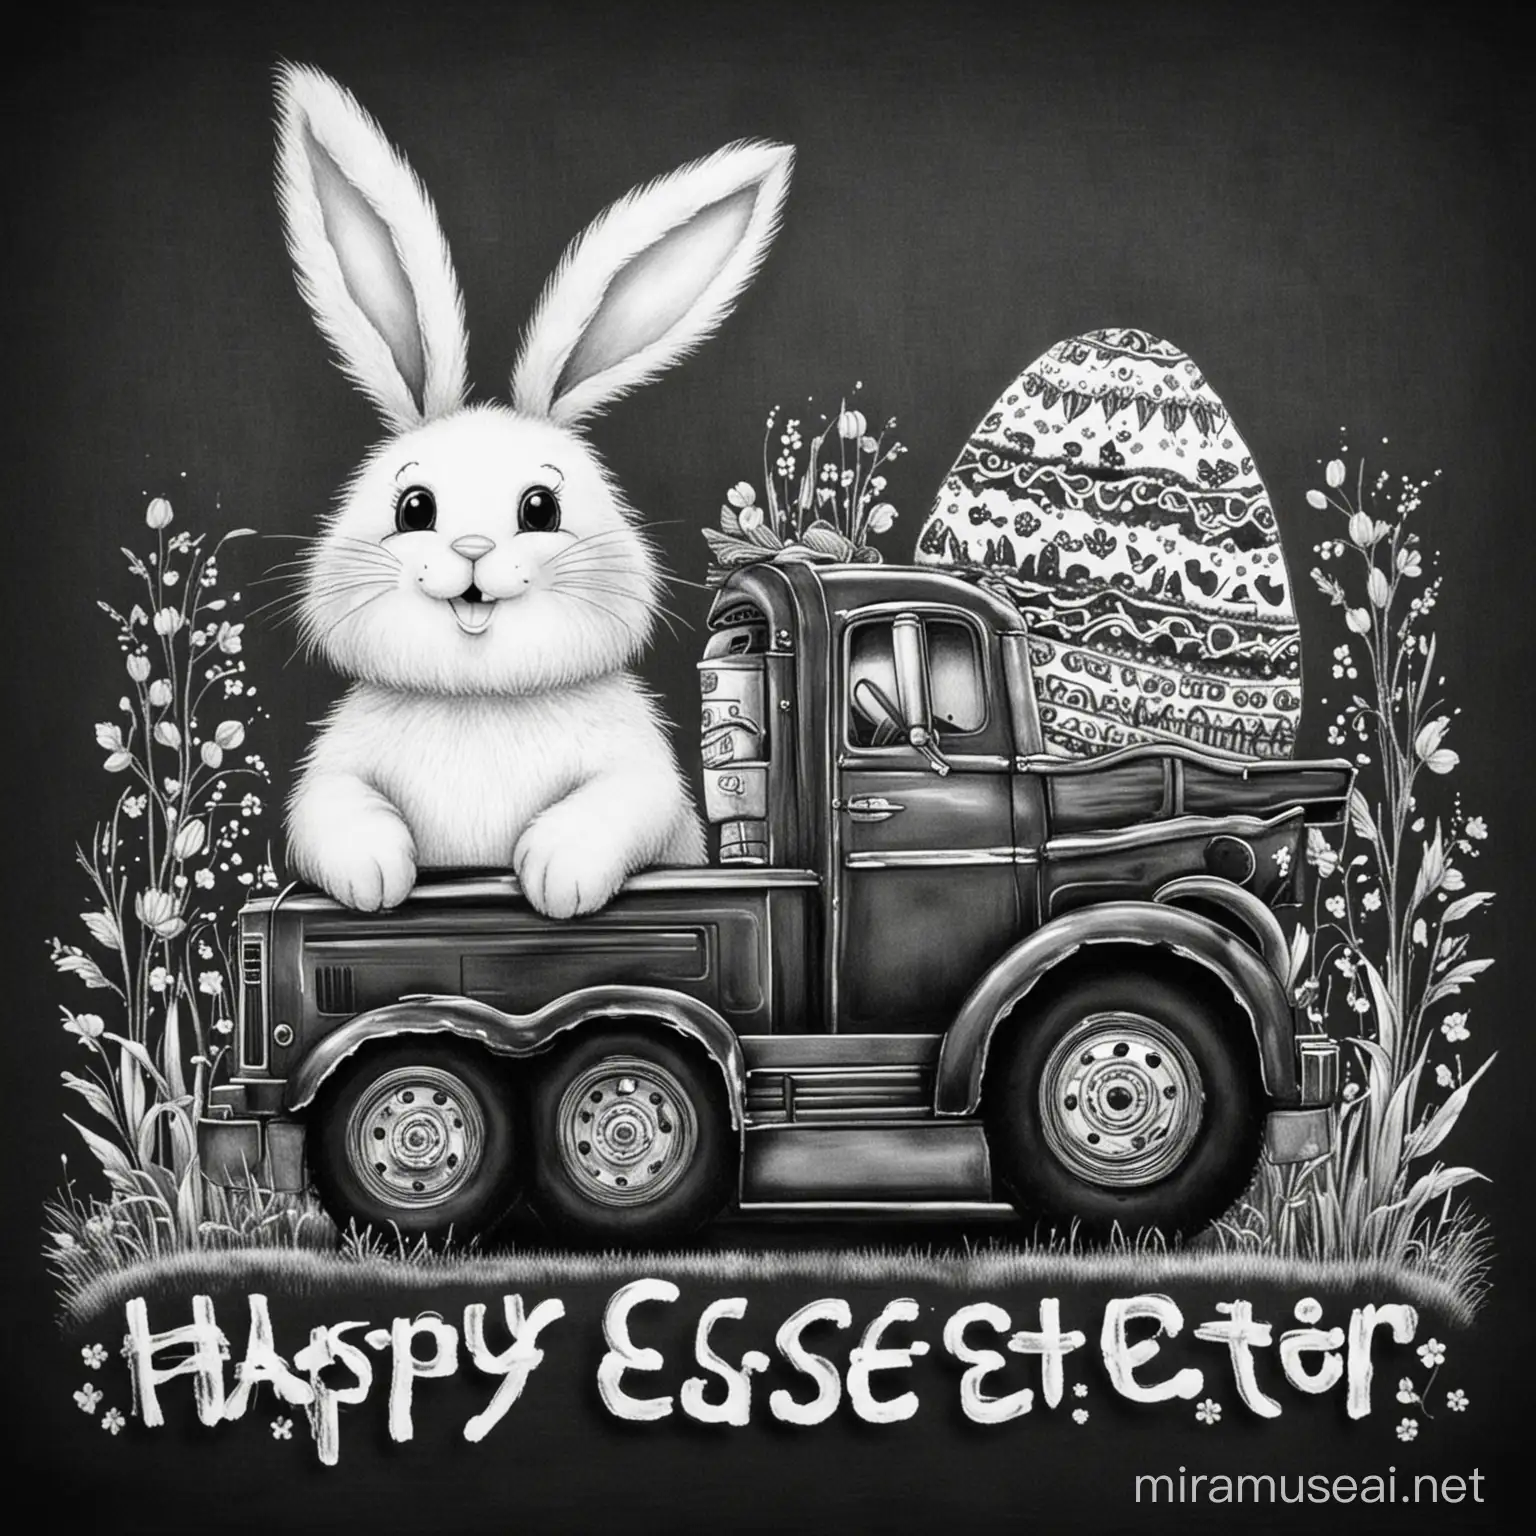 Cheerful Easter Bunny with Truck in Black and White Sketch